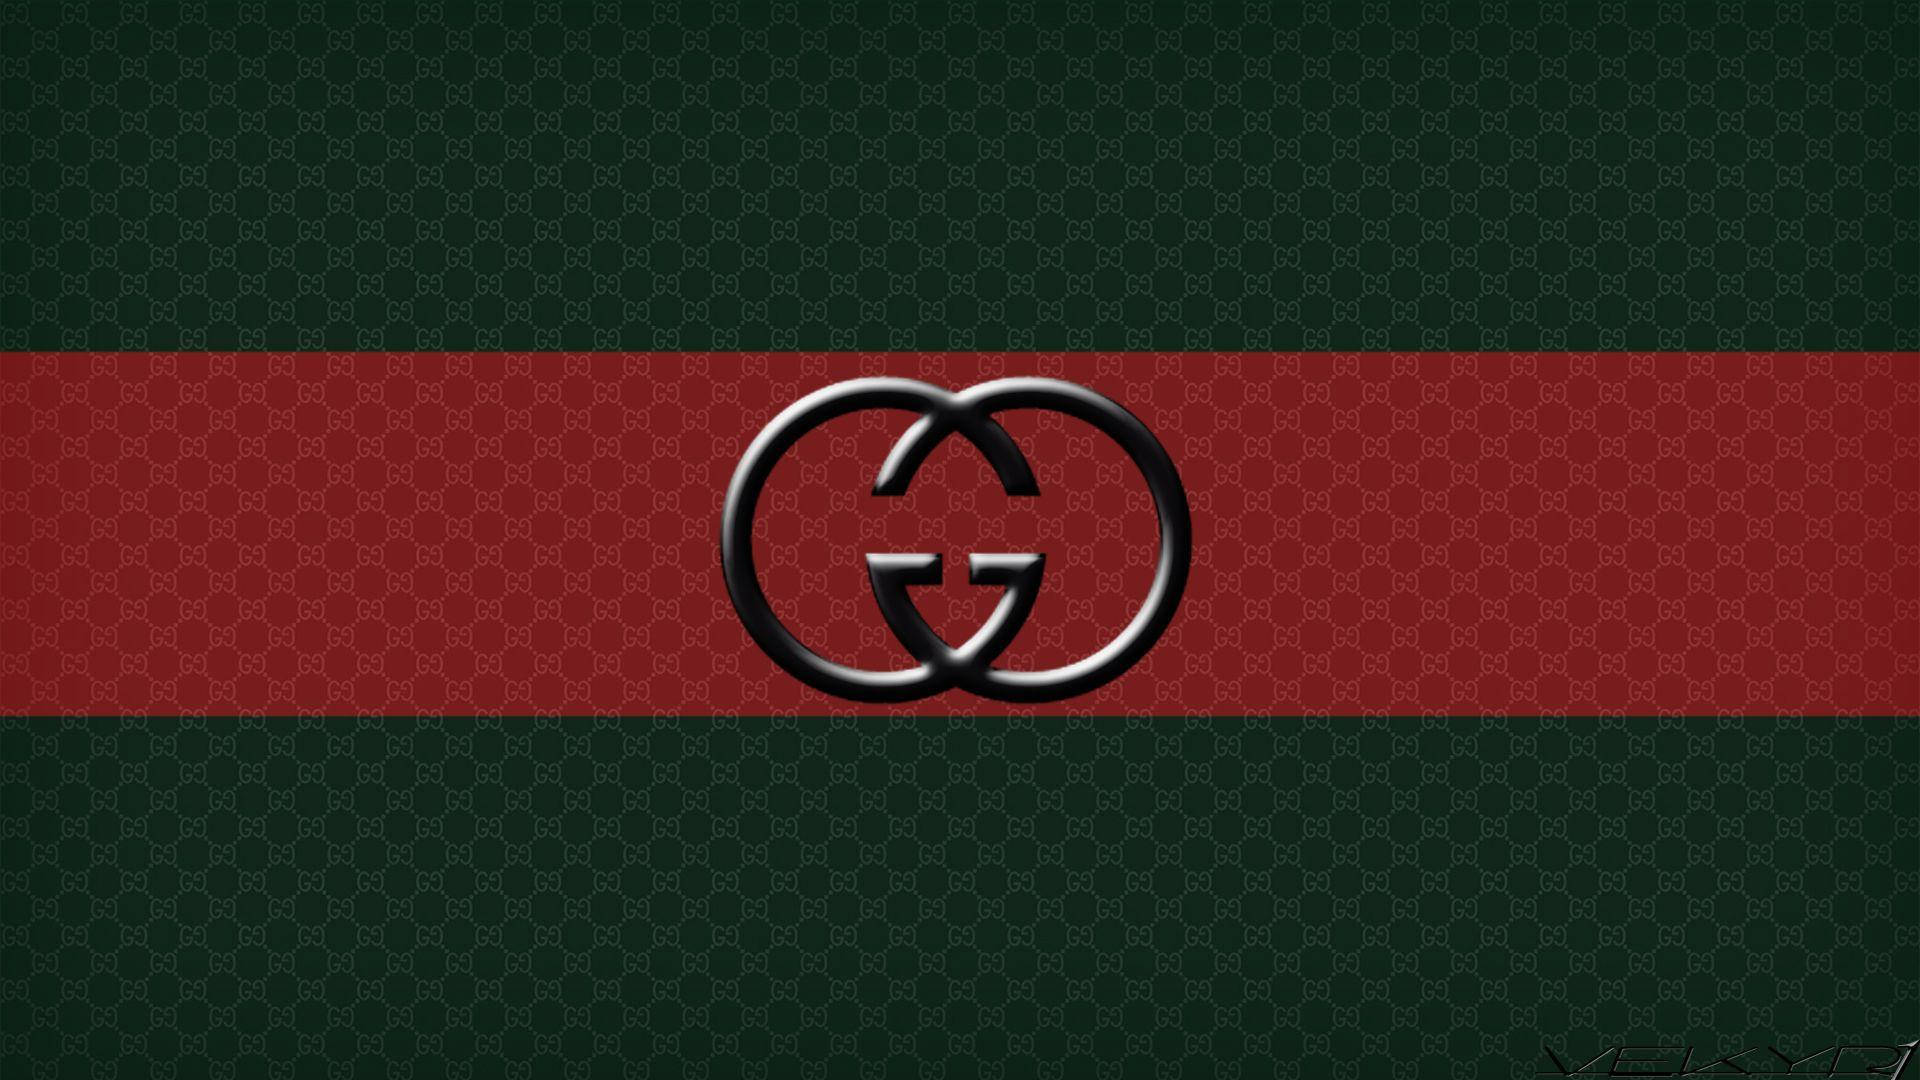 Gucci 1920X1080 Wallpaper and Background Image